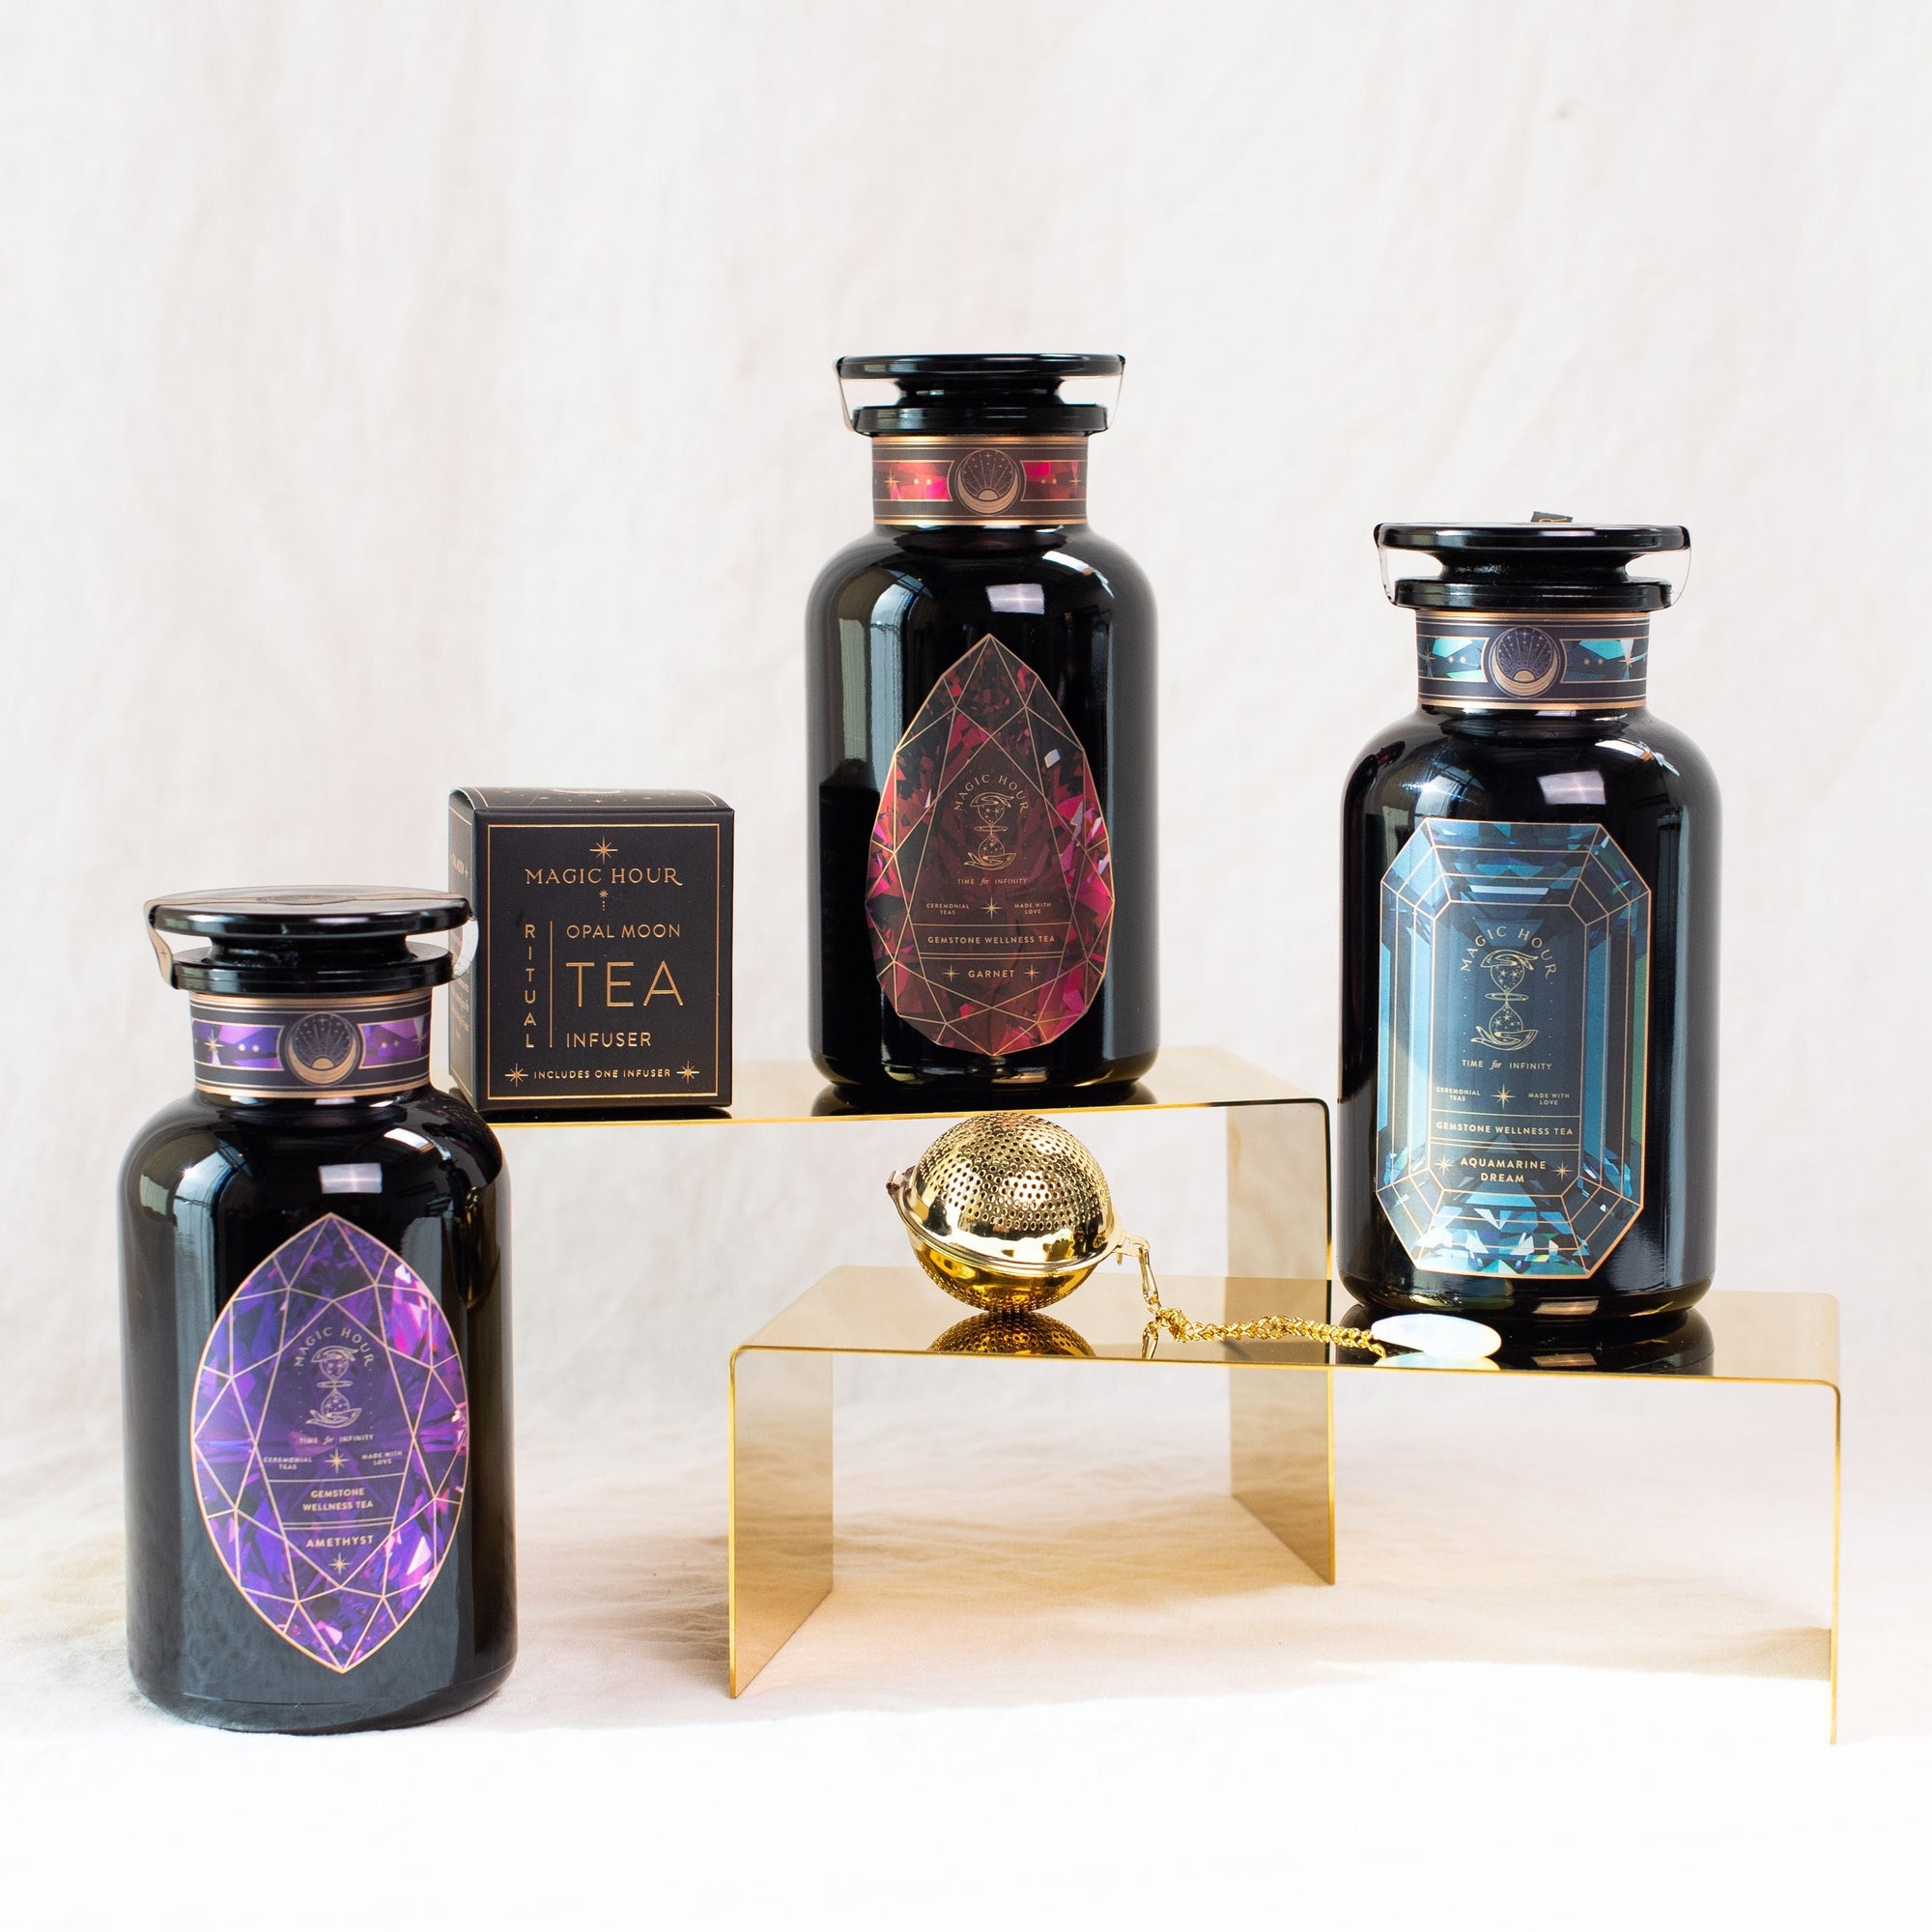 The image shows three black glass jars of Magic Hour Gemstone Bundle: Garnet, Amethyst, Aquamarine with colorful geometric labels, arranged on golden risers. Each label features intricate designs in different colors: purple, red, and blue. A small black box labeled "Magic Hour Tea Infuser" and a gold tea infuser are also displayed.